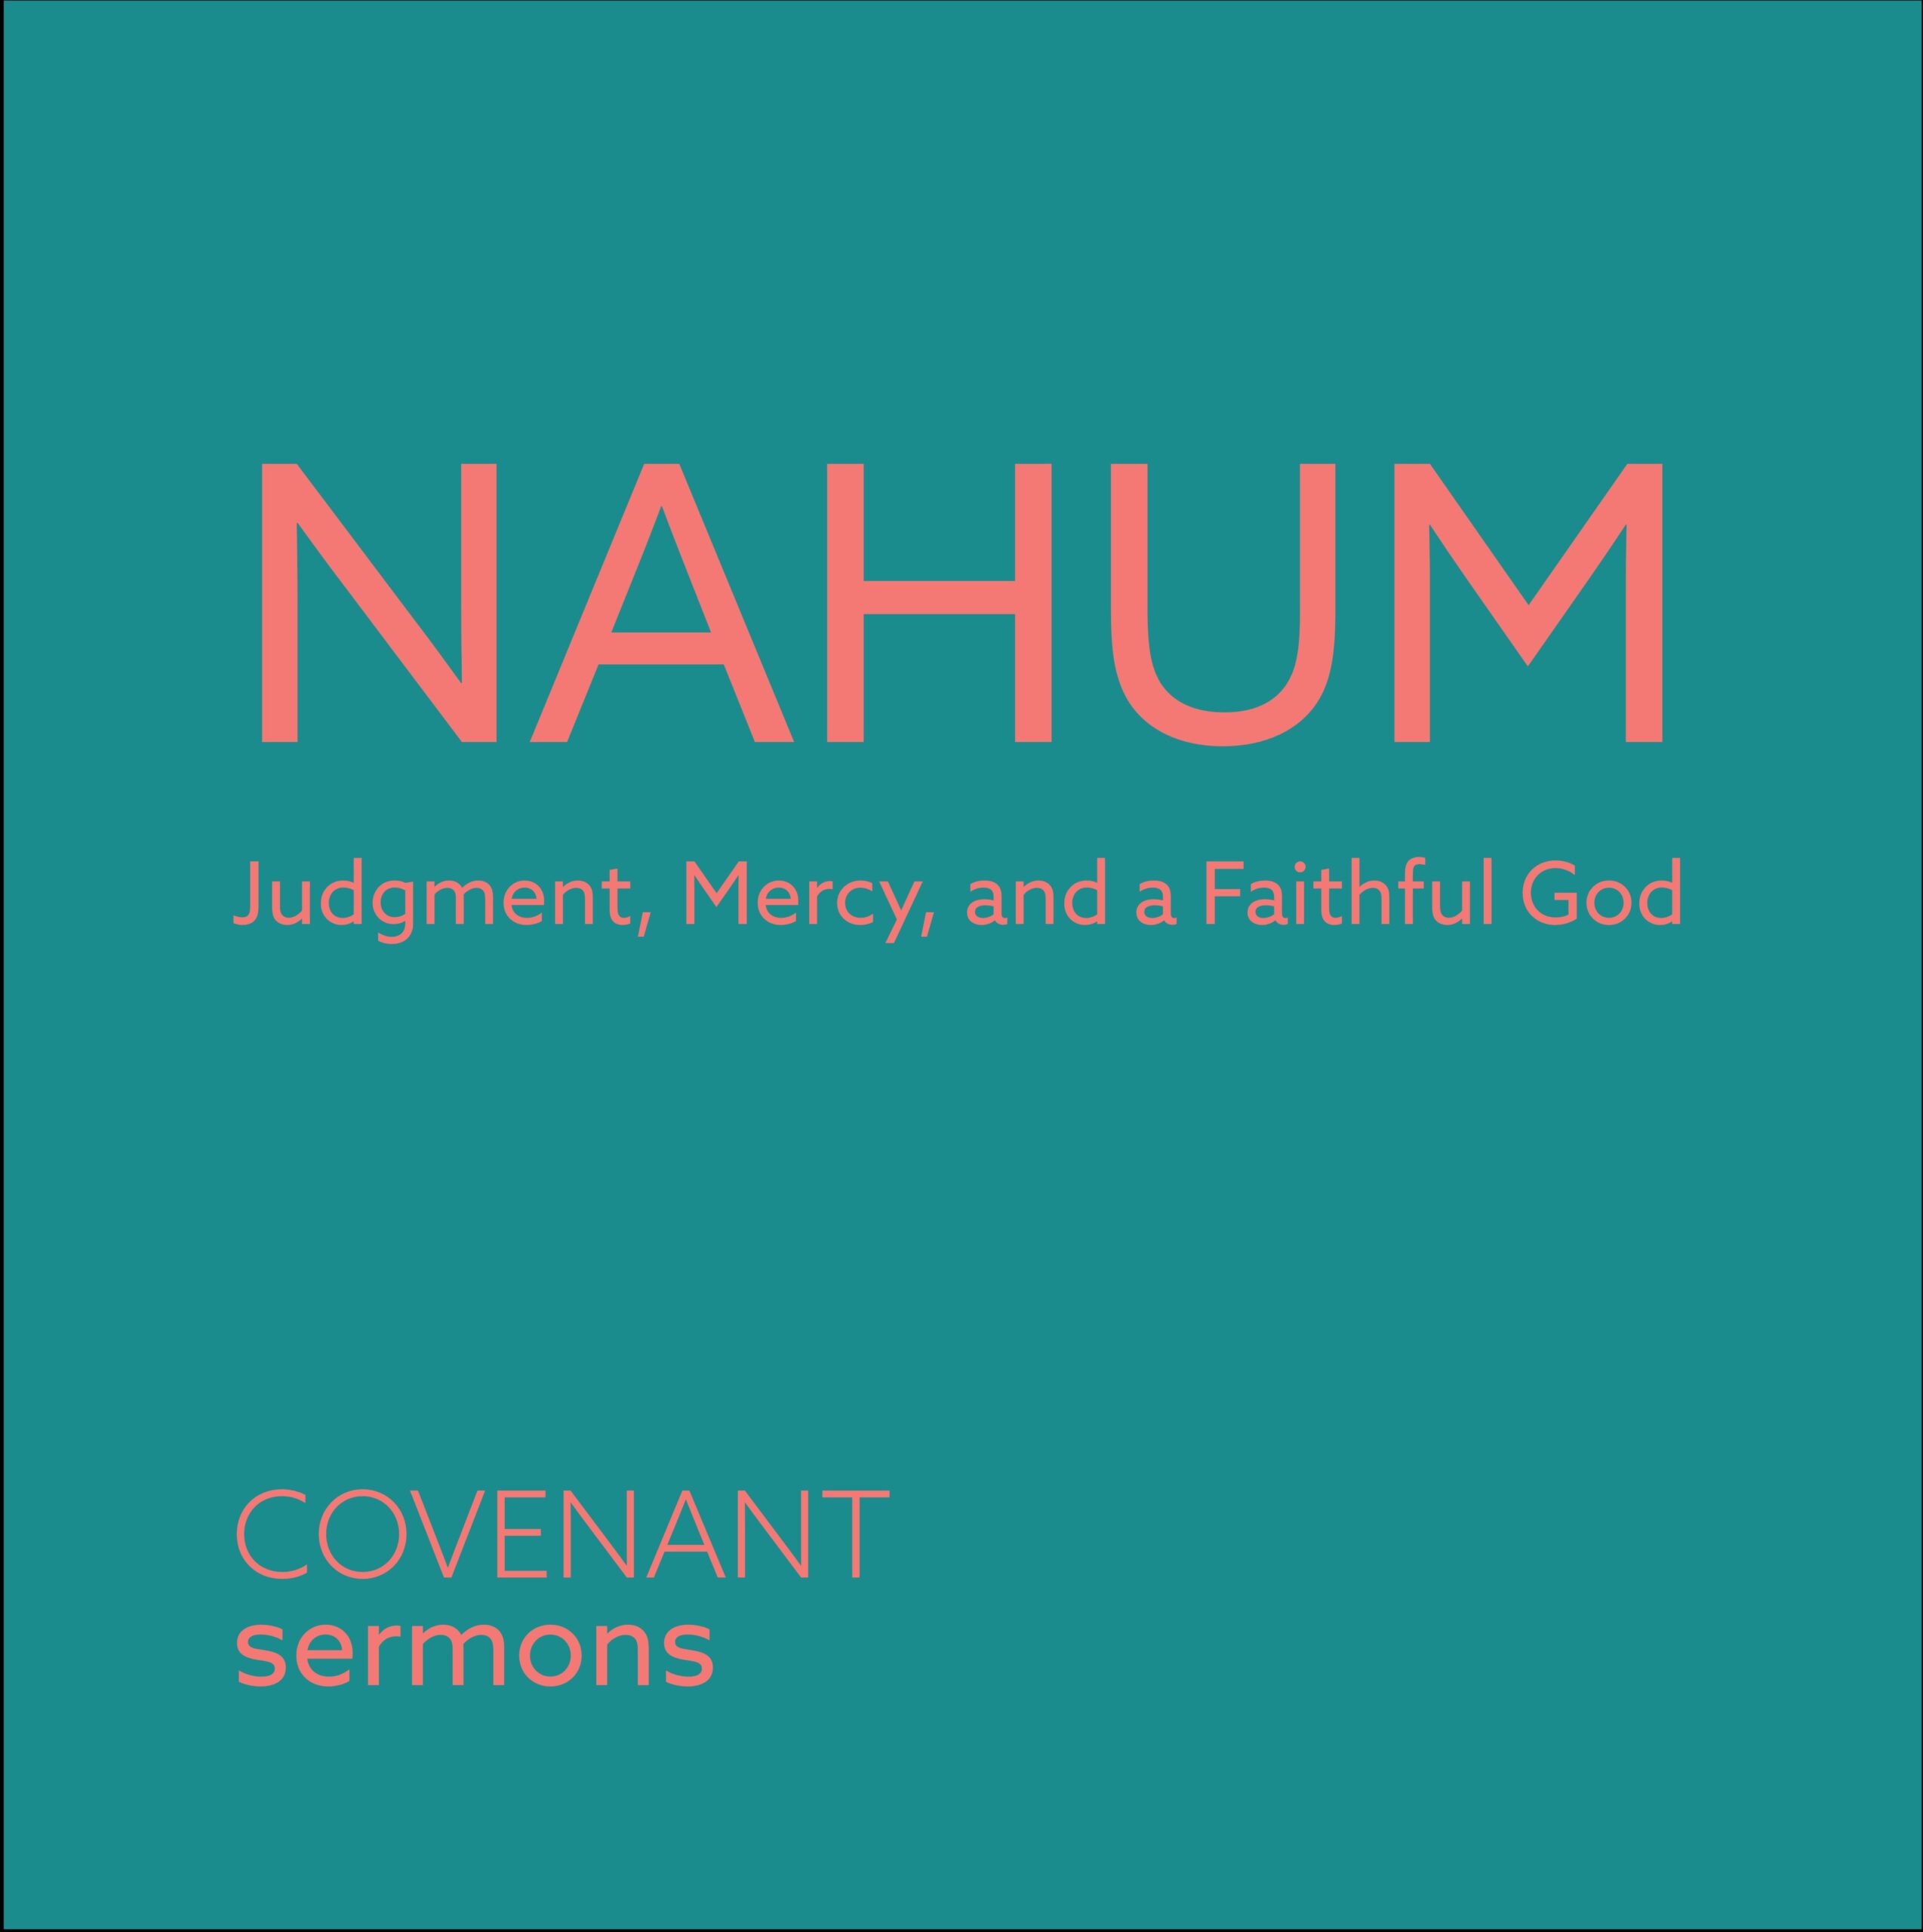 Rock of Ages | Nahum 1:1-7